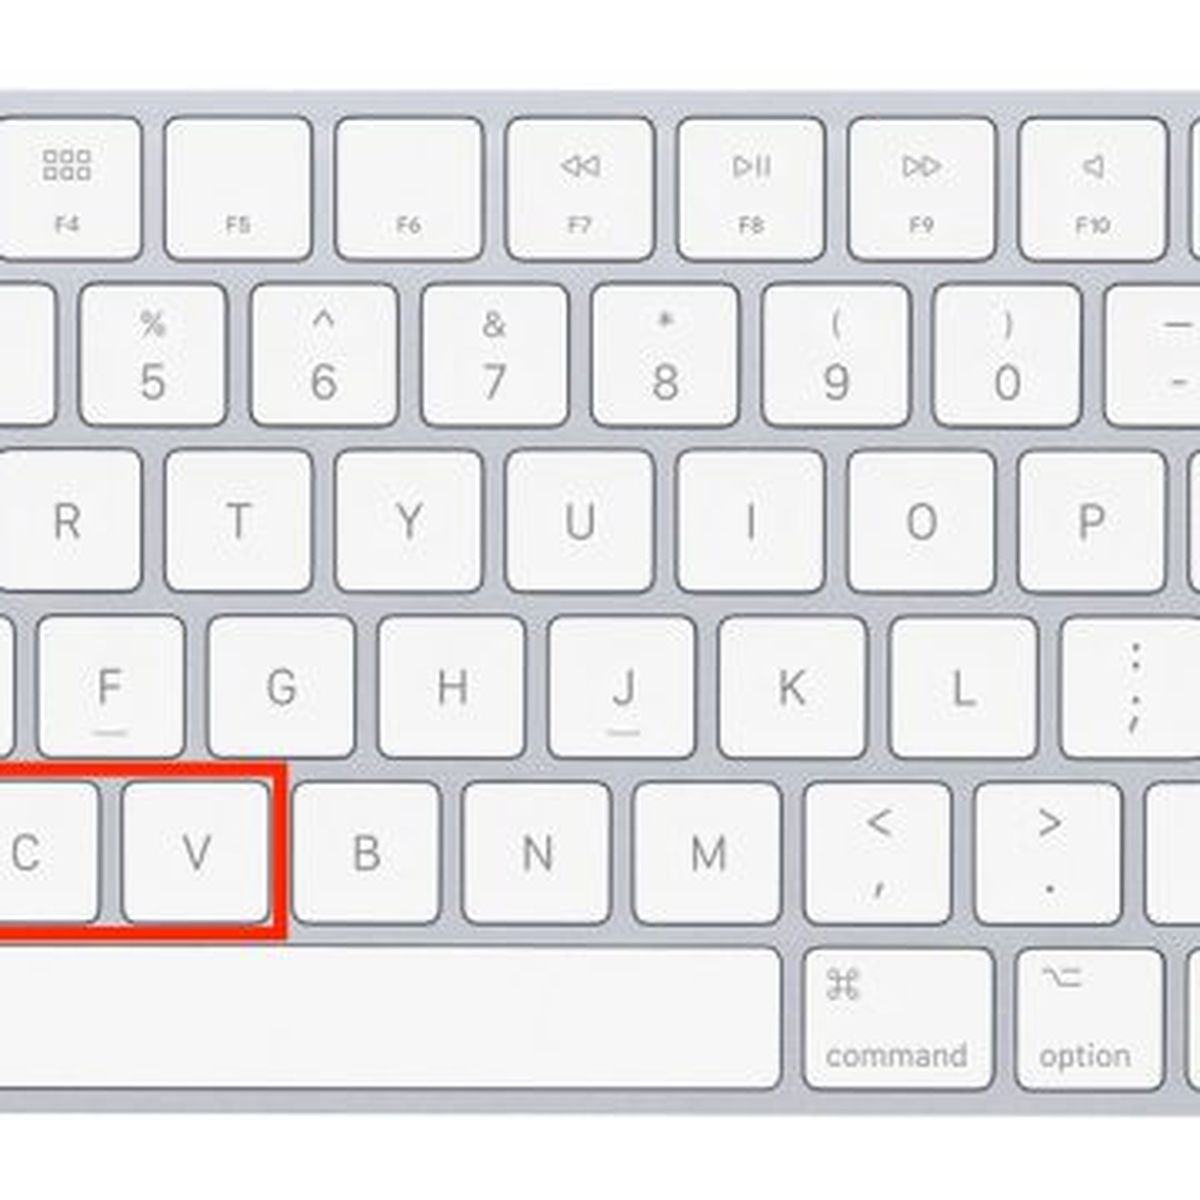 Command on mac for copy and paste shortcut